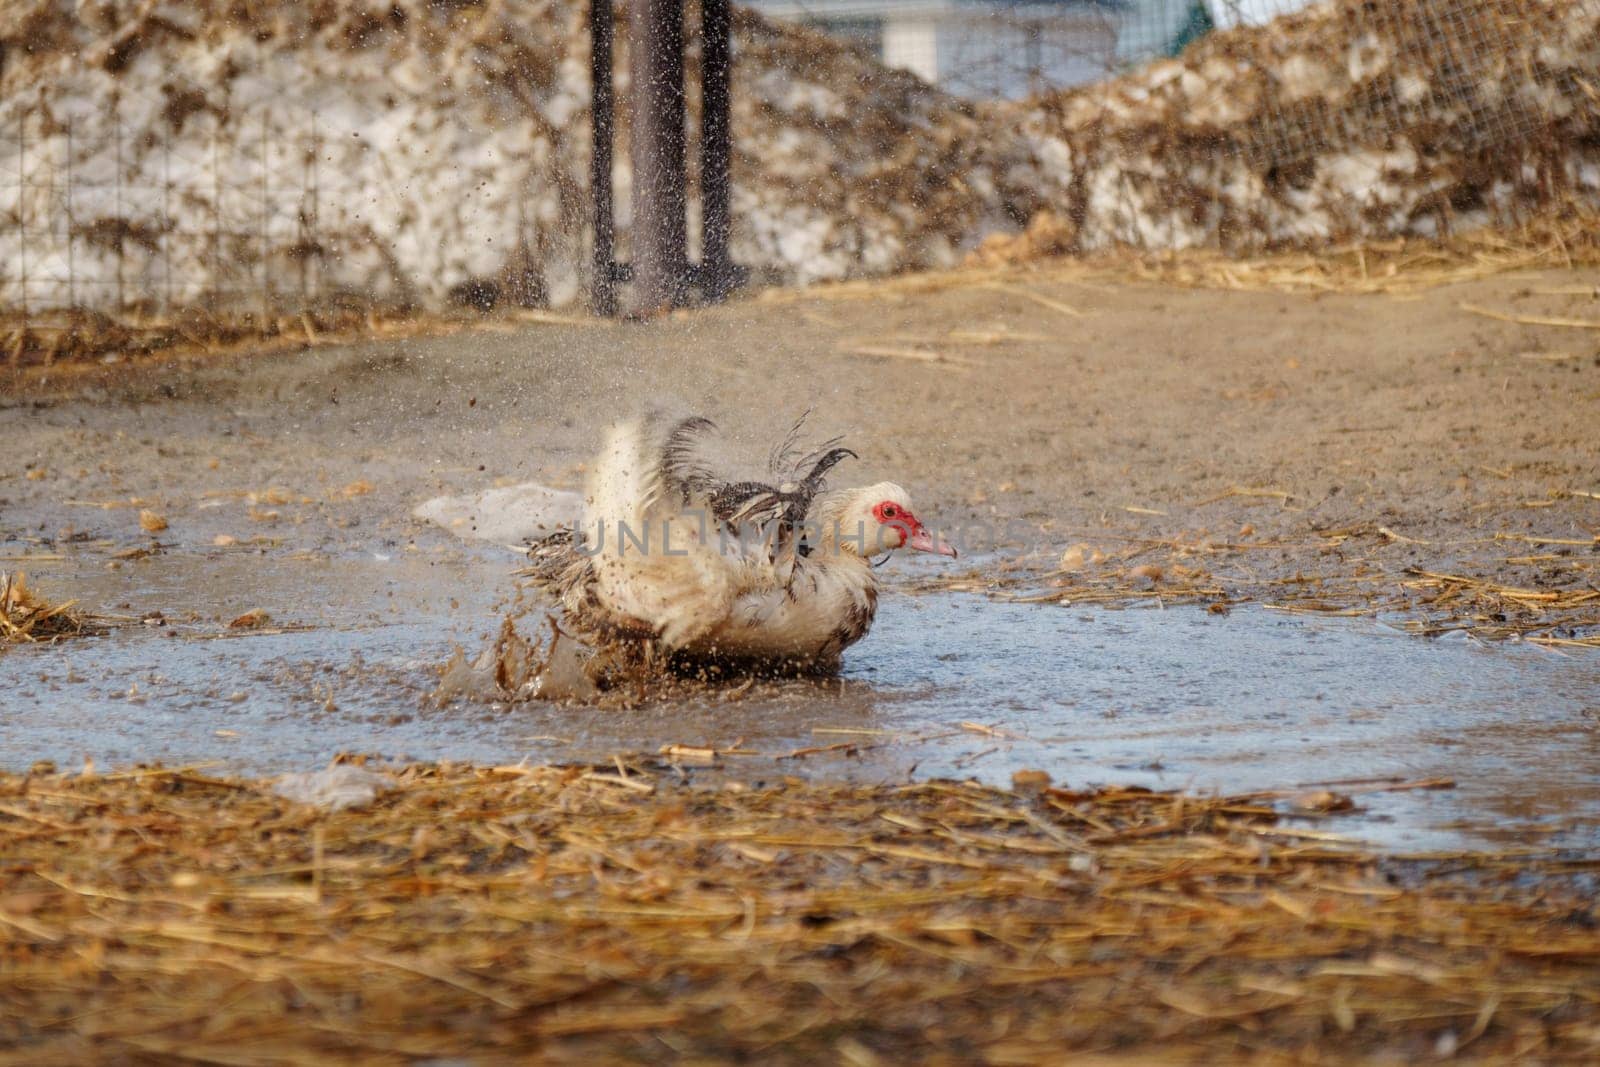 Muscovy duck and a distinctive red face is seen rummaging through the soil at the edge of a puddle.